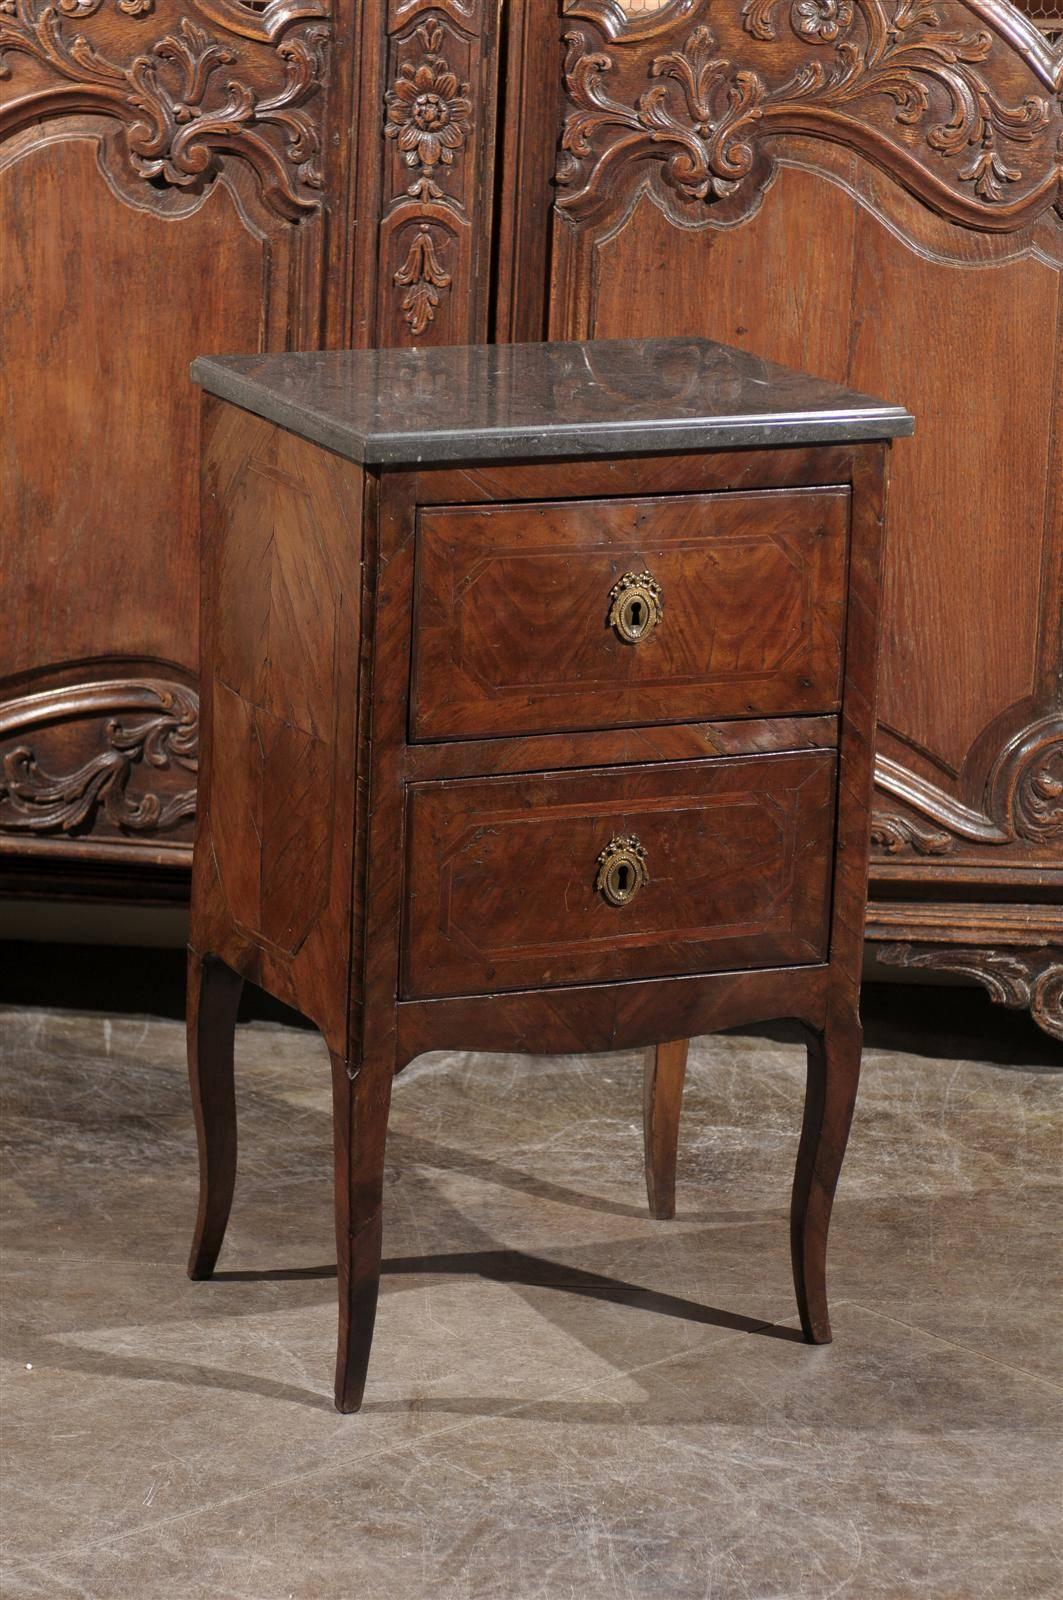 This petite Italian commode from the early 19th century features a rectangular dark grey marble-top over two drawers. The sides are decorated with a quarter veneer surrounded by an octagonal banded inlay. Each drawer, also adorned with the same